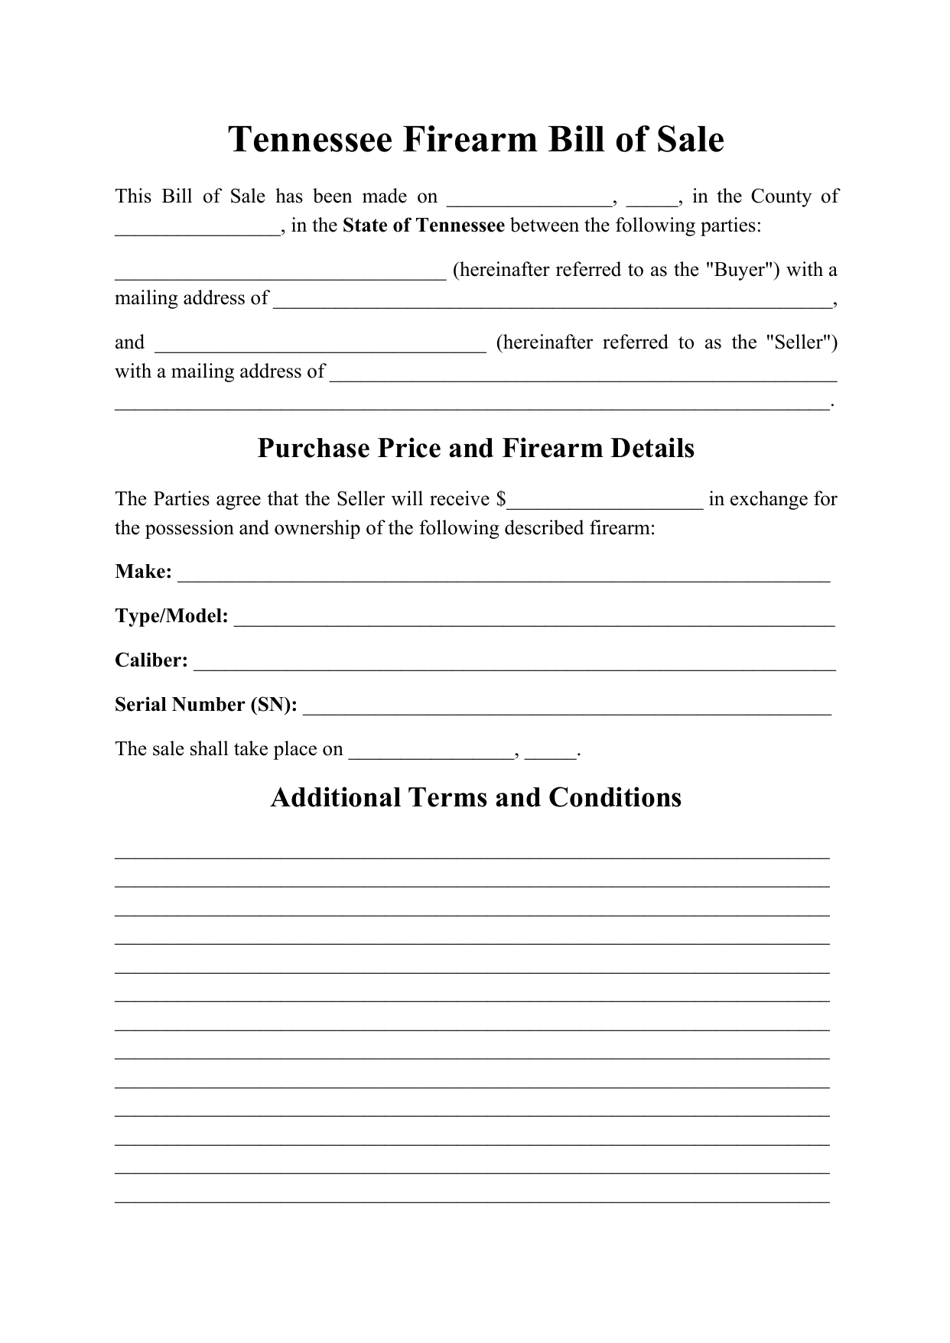 Firearm Bill of Sale Form - Tennessee, Page 1